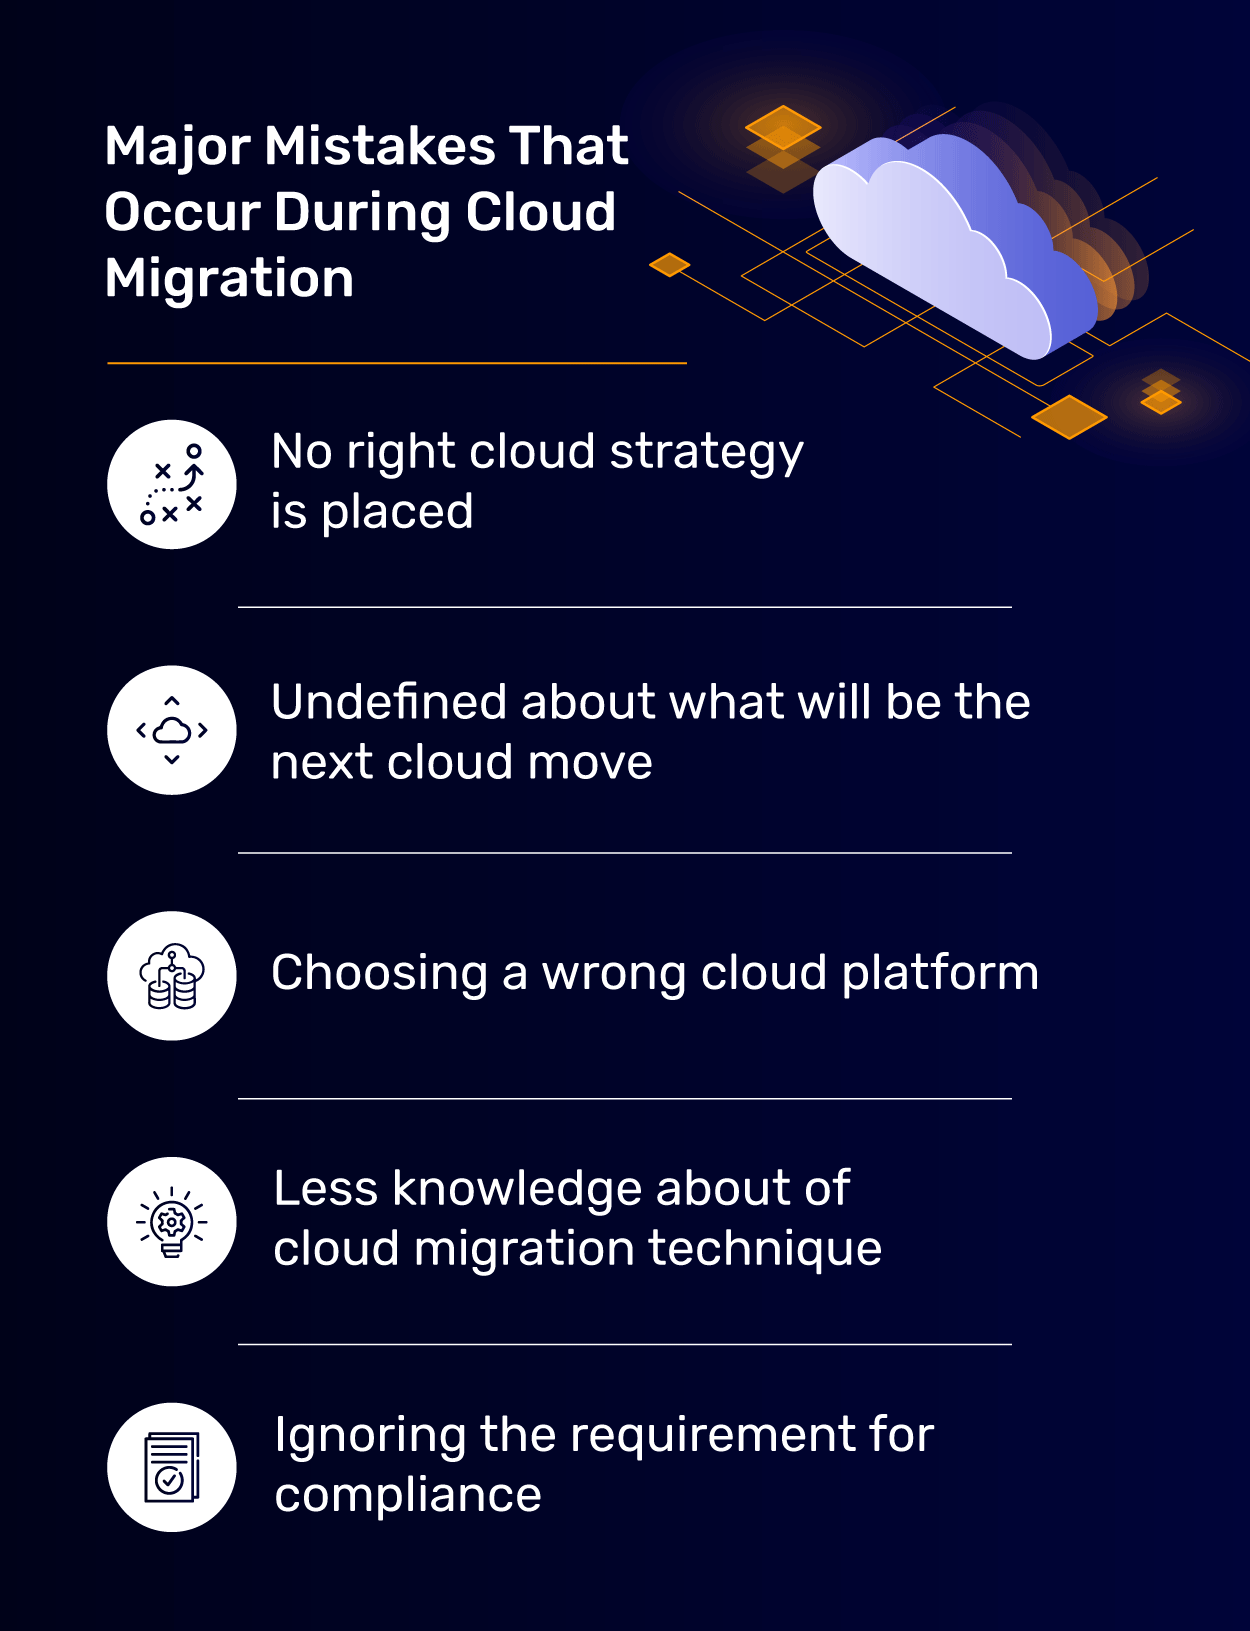 Major Mistakes That Occur During Cloud Migration